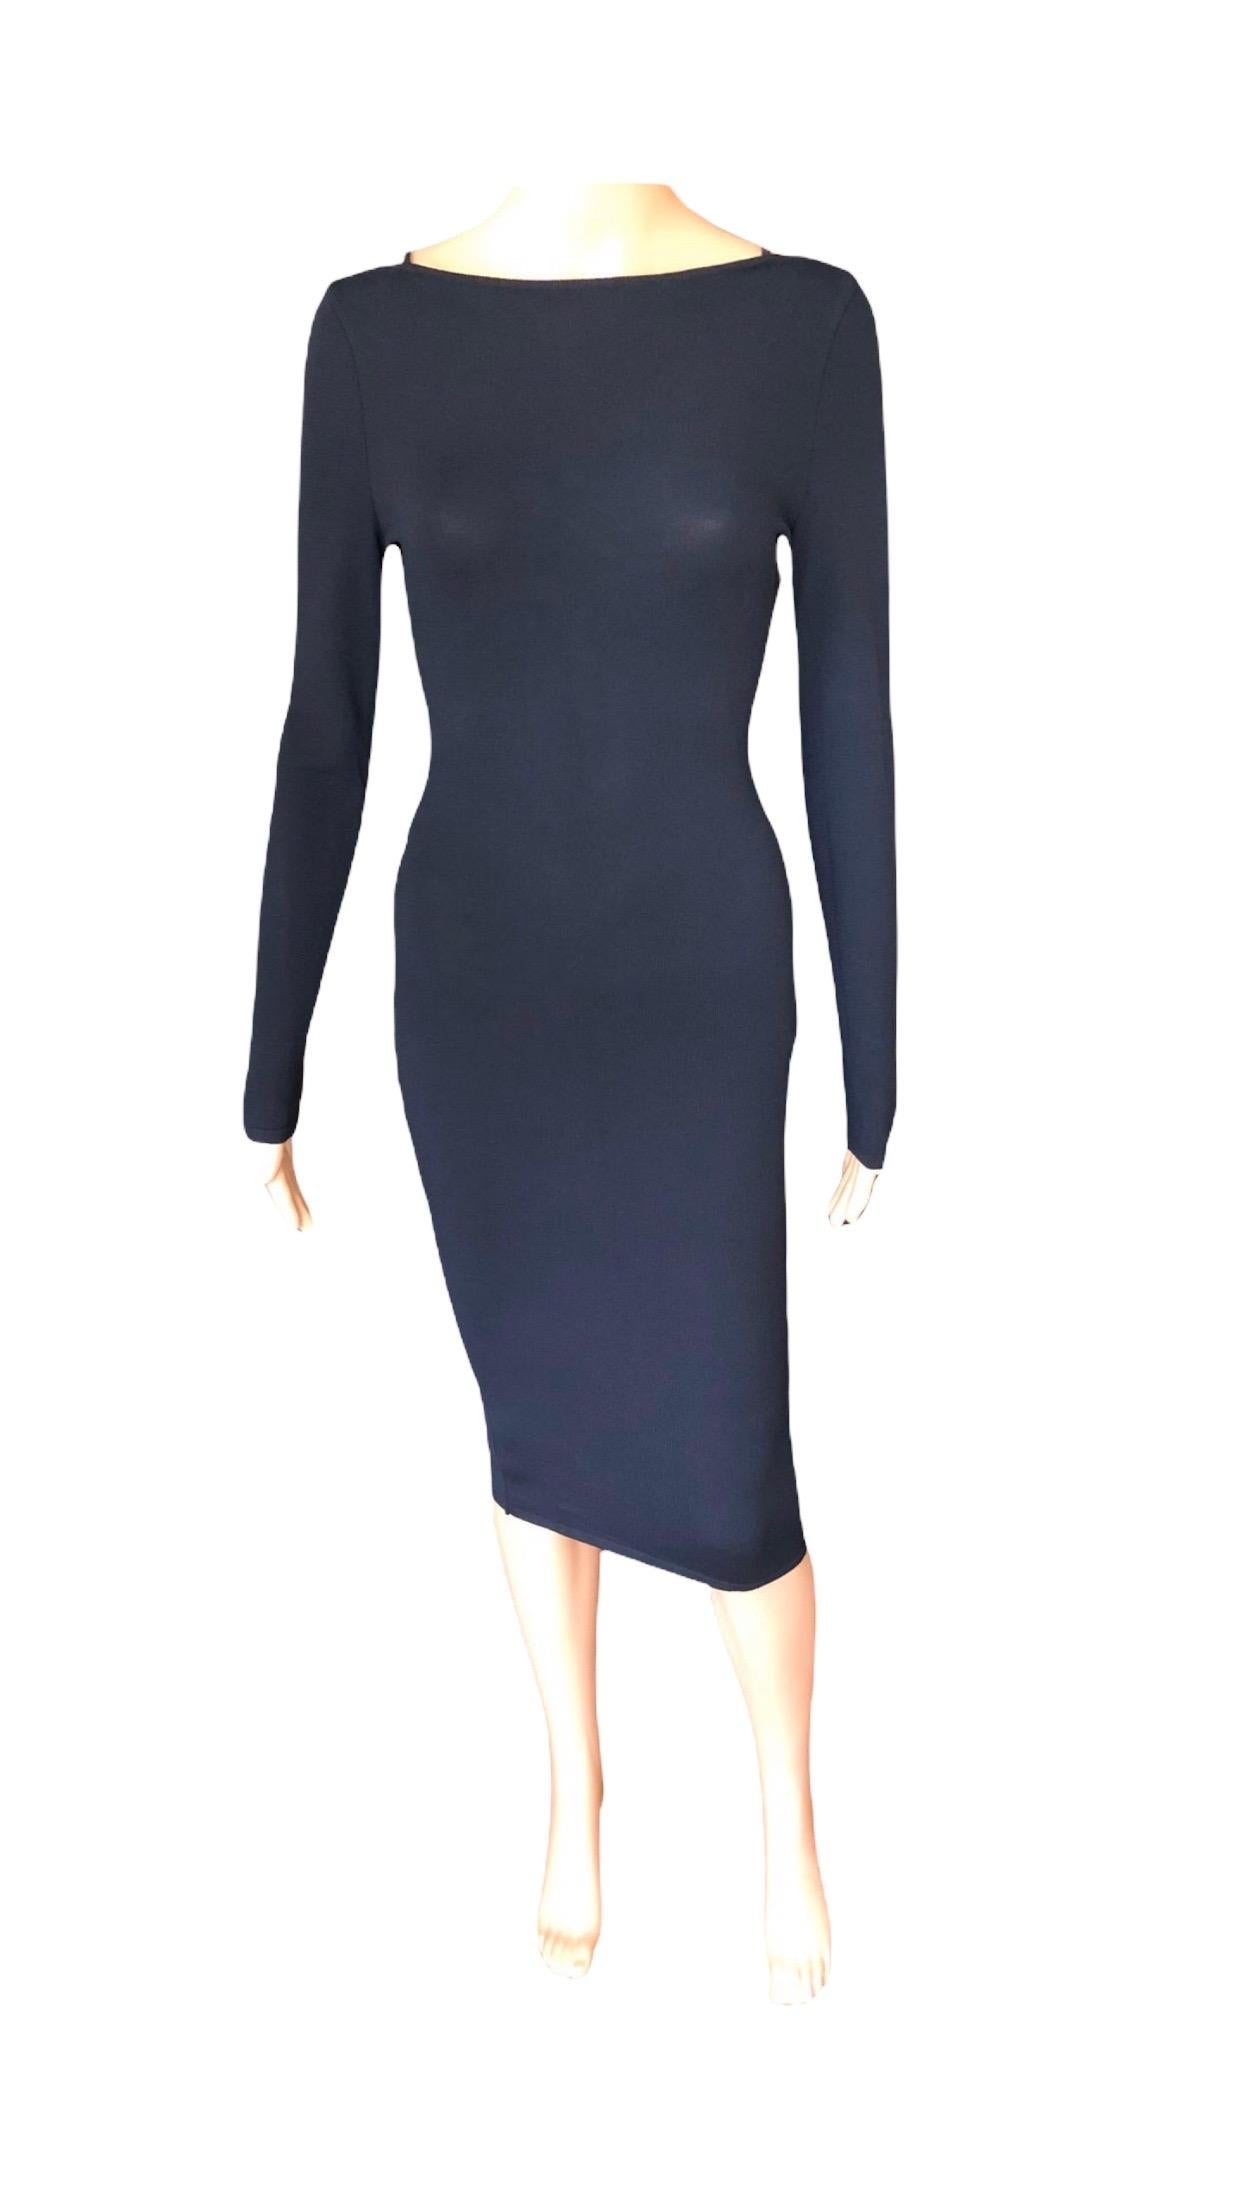 Tom Ford for Gucci S/S 1998 Vintage Bodycon Knit Midi Dress 4